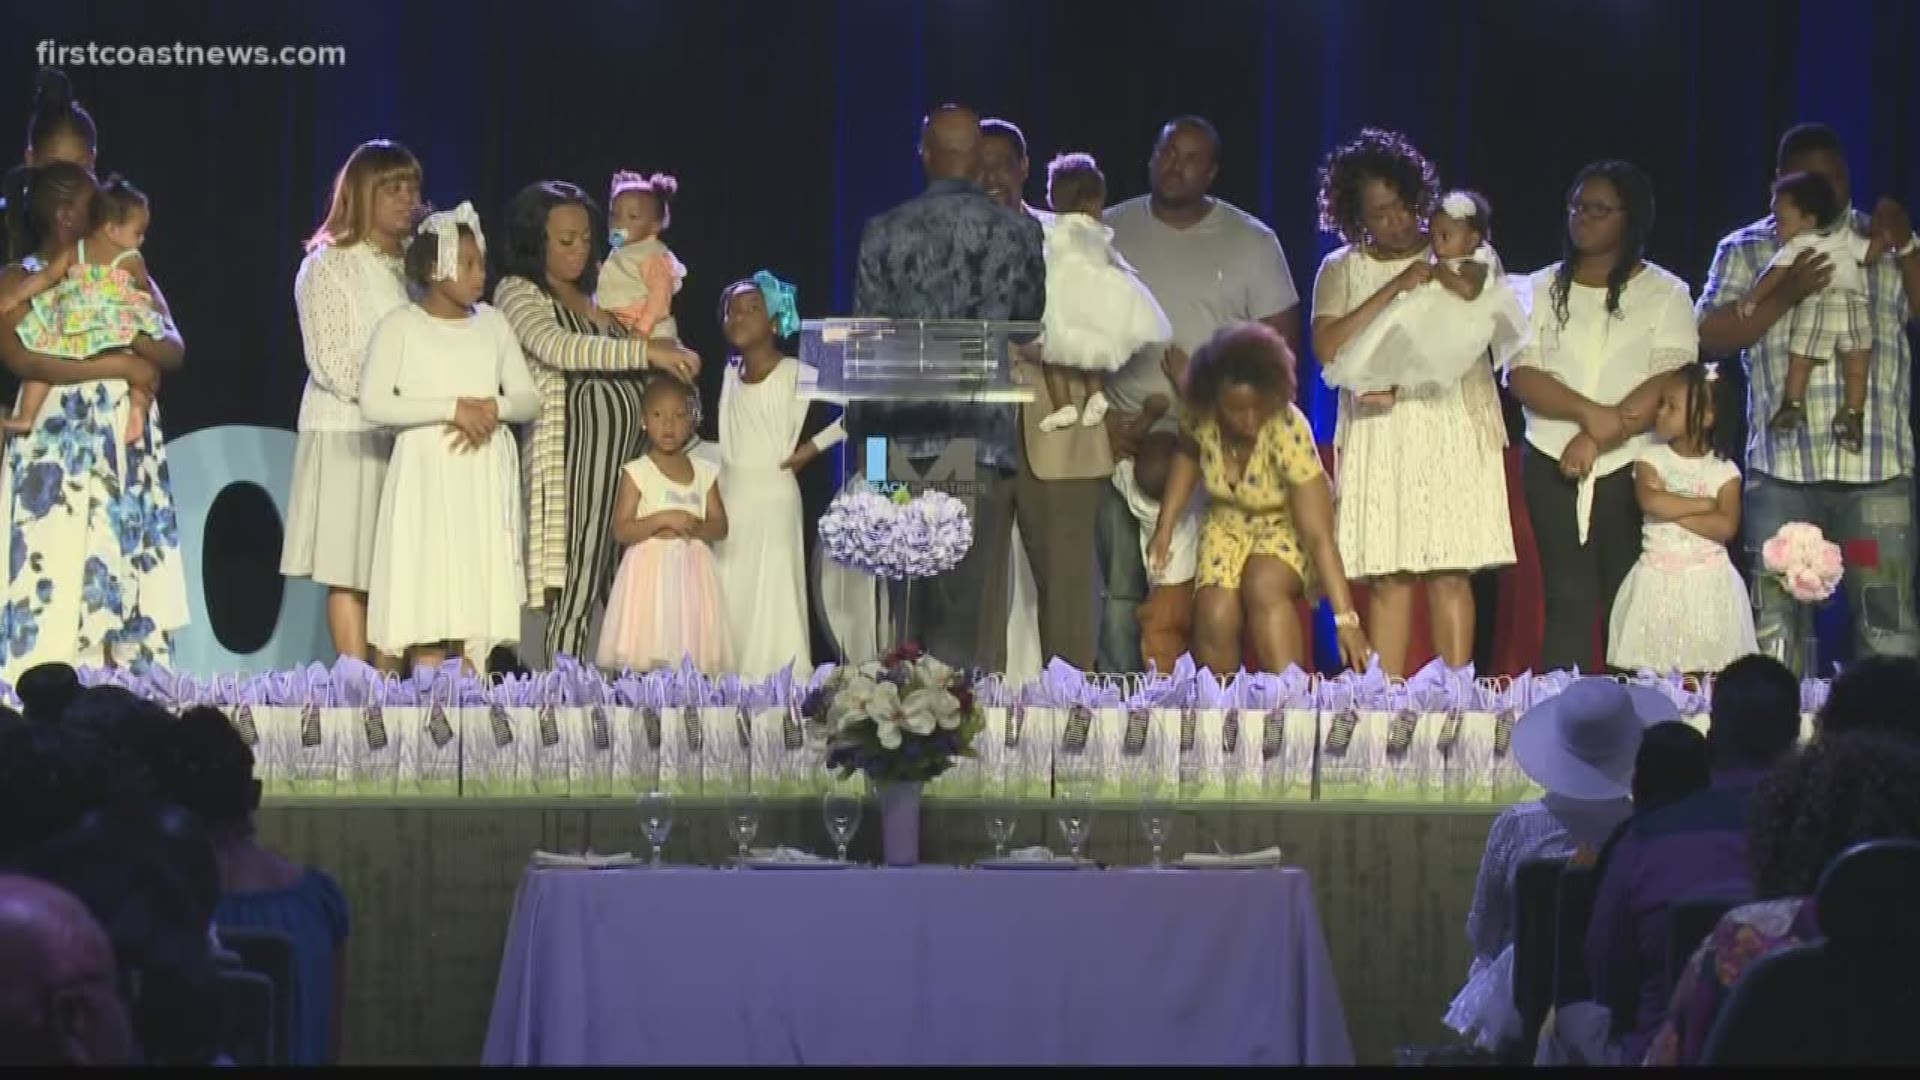 This Mother’s Day, an Arlington church gave some mothers a second chance and a fresh start.